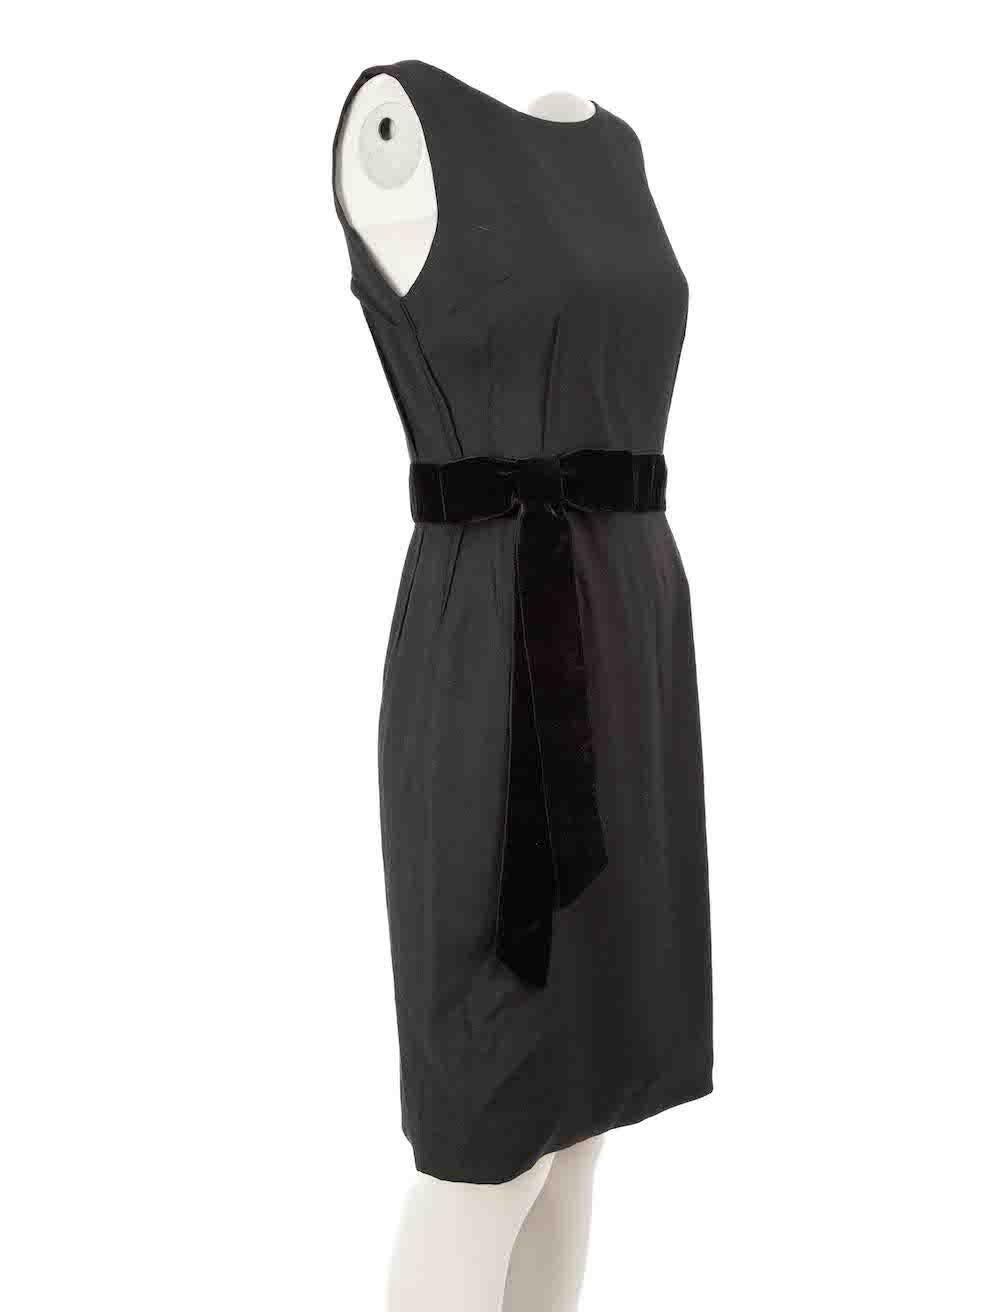 CONDITION is Very good. Hardly any visible wear to dress is evident. Brand label is partially detached on this used Dolce & Gabbana designer resale item.
 
 
 
 Details
 
 
 Black
 
 Wool
 
 Dress
 
 Sleeveless
 
 Round neck
 
 Knee length
 
 Velvet